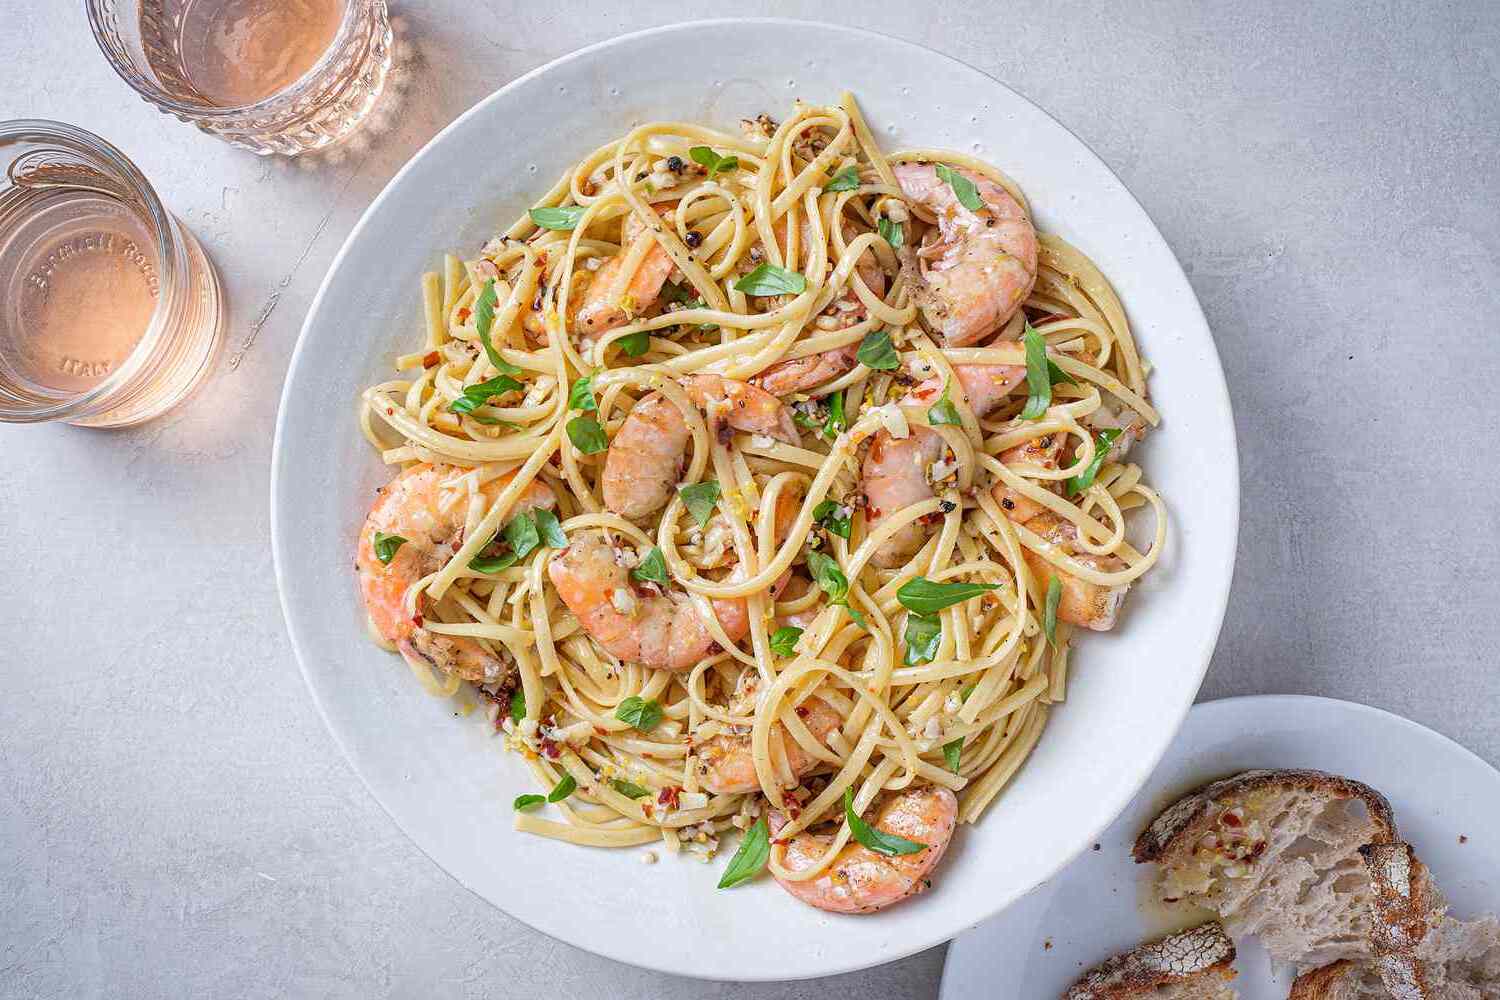 14-facts-about-national-shrimp-scampi-day-april-28th